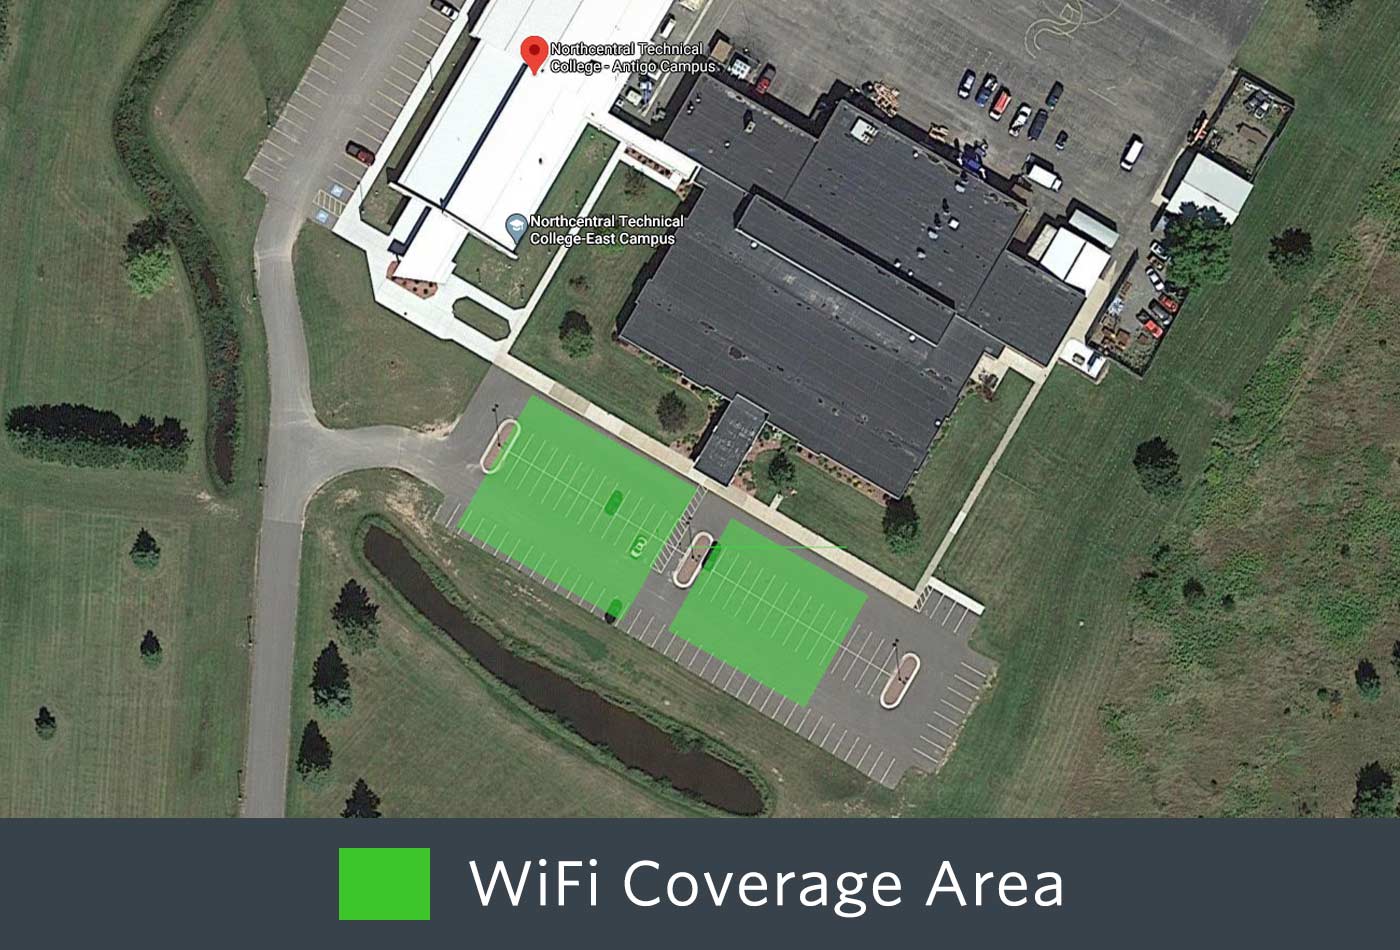 Outdoor WiFi coverage of the front of the Antigo Campus